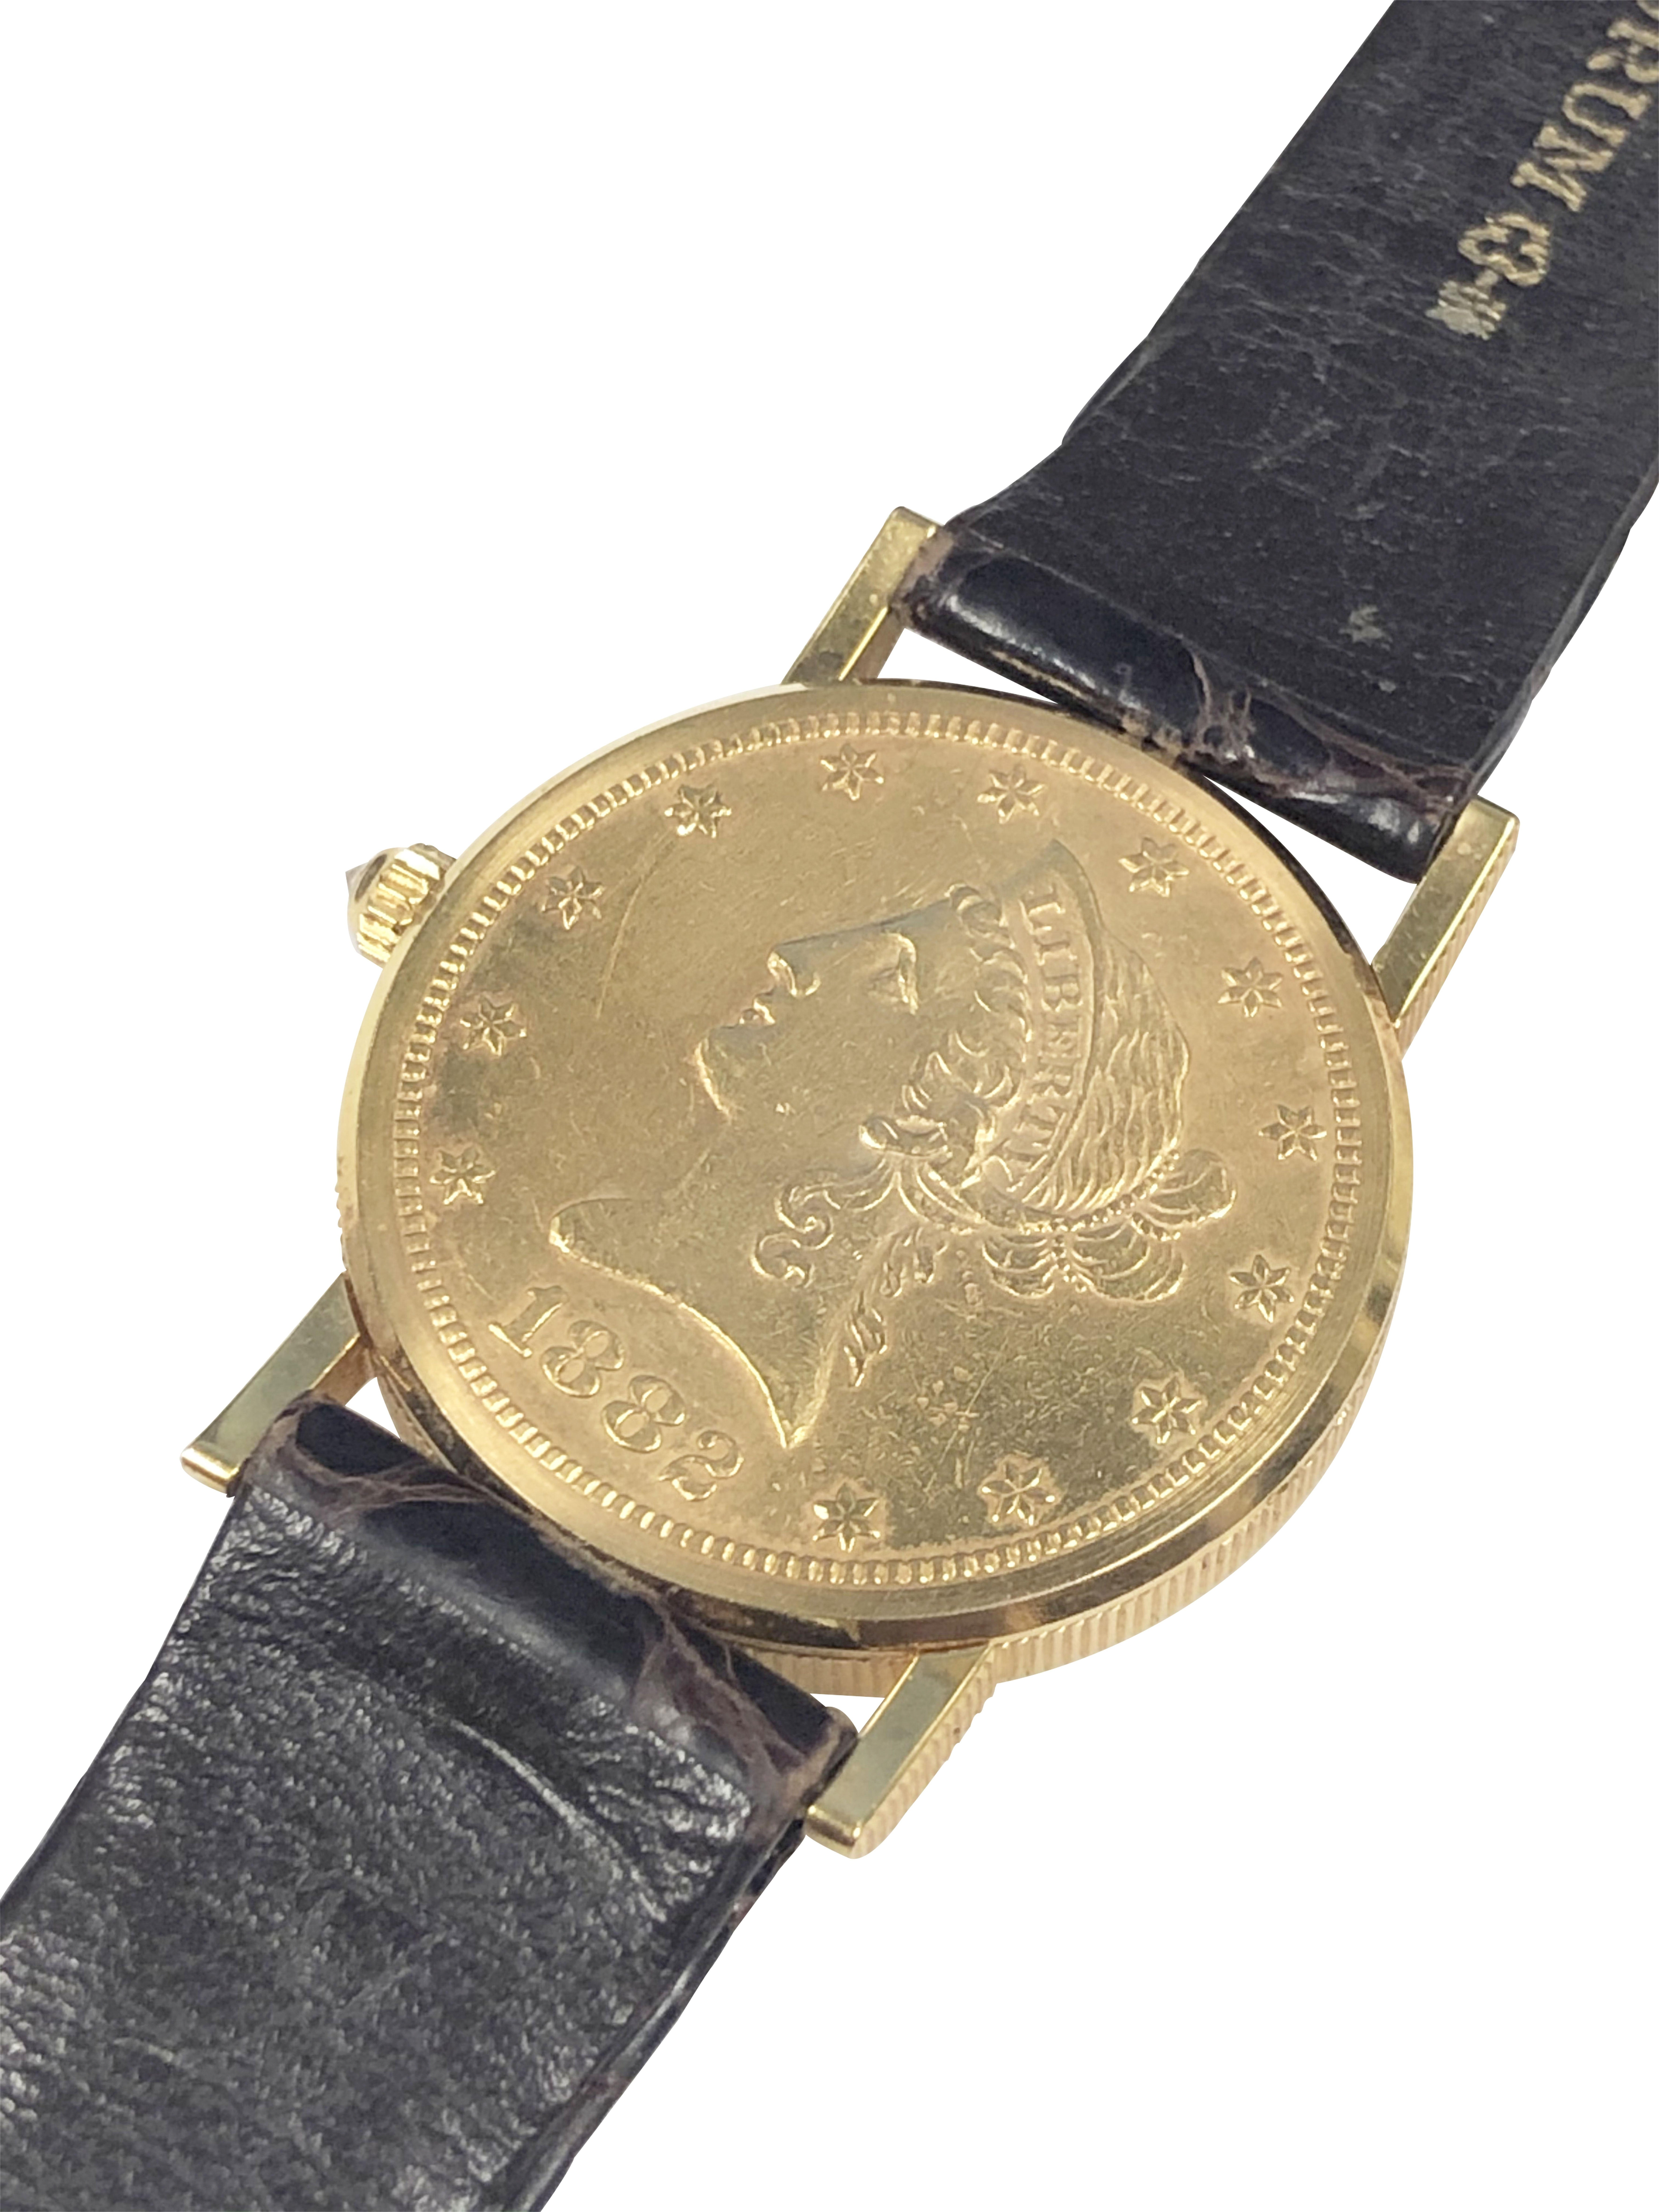 Circa 1990 Corum Wrist Watch, made from two 1882 $10 Dollar 22K Gold Coins, 28 M.M. Diameter X 4 M.M. thick 2 Piece 18K Yellow Gold Case, Quartz Movement and a Diamond set crown. Original Brown Reptile strap with original Corum Gold Plate buckle,